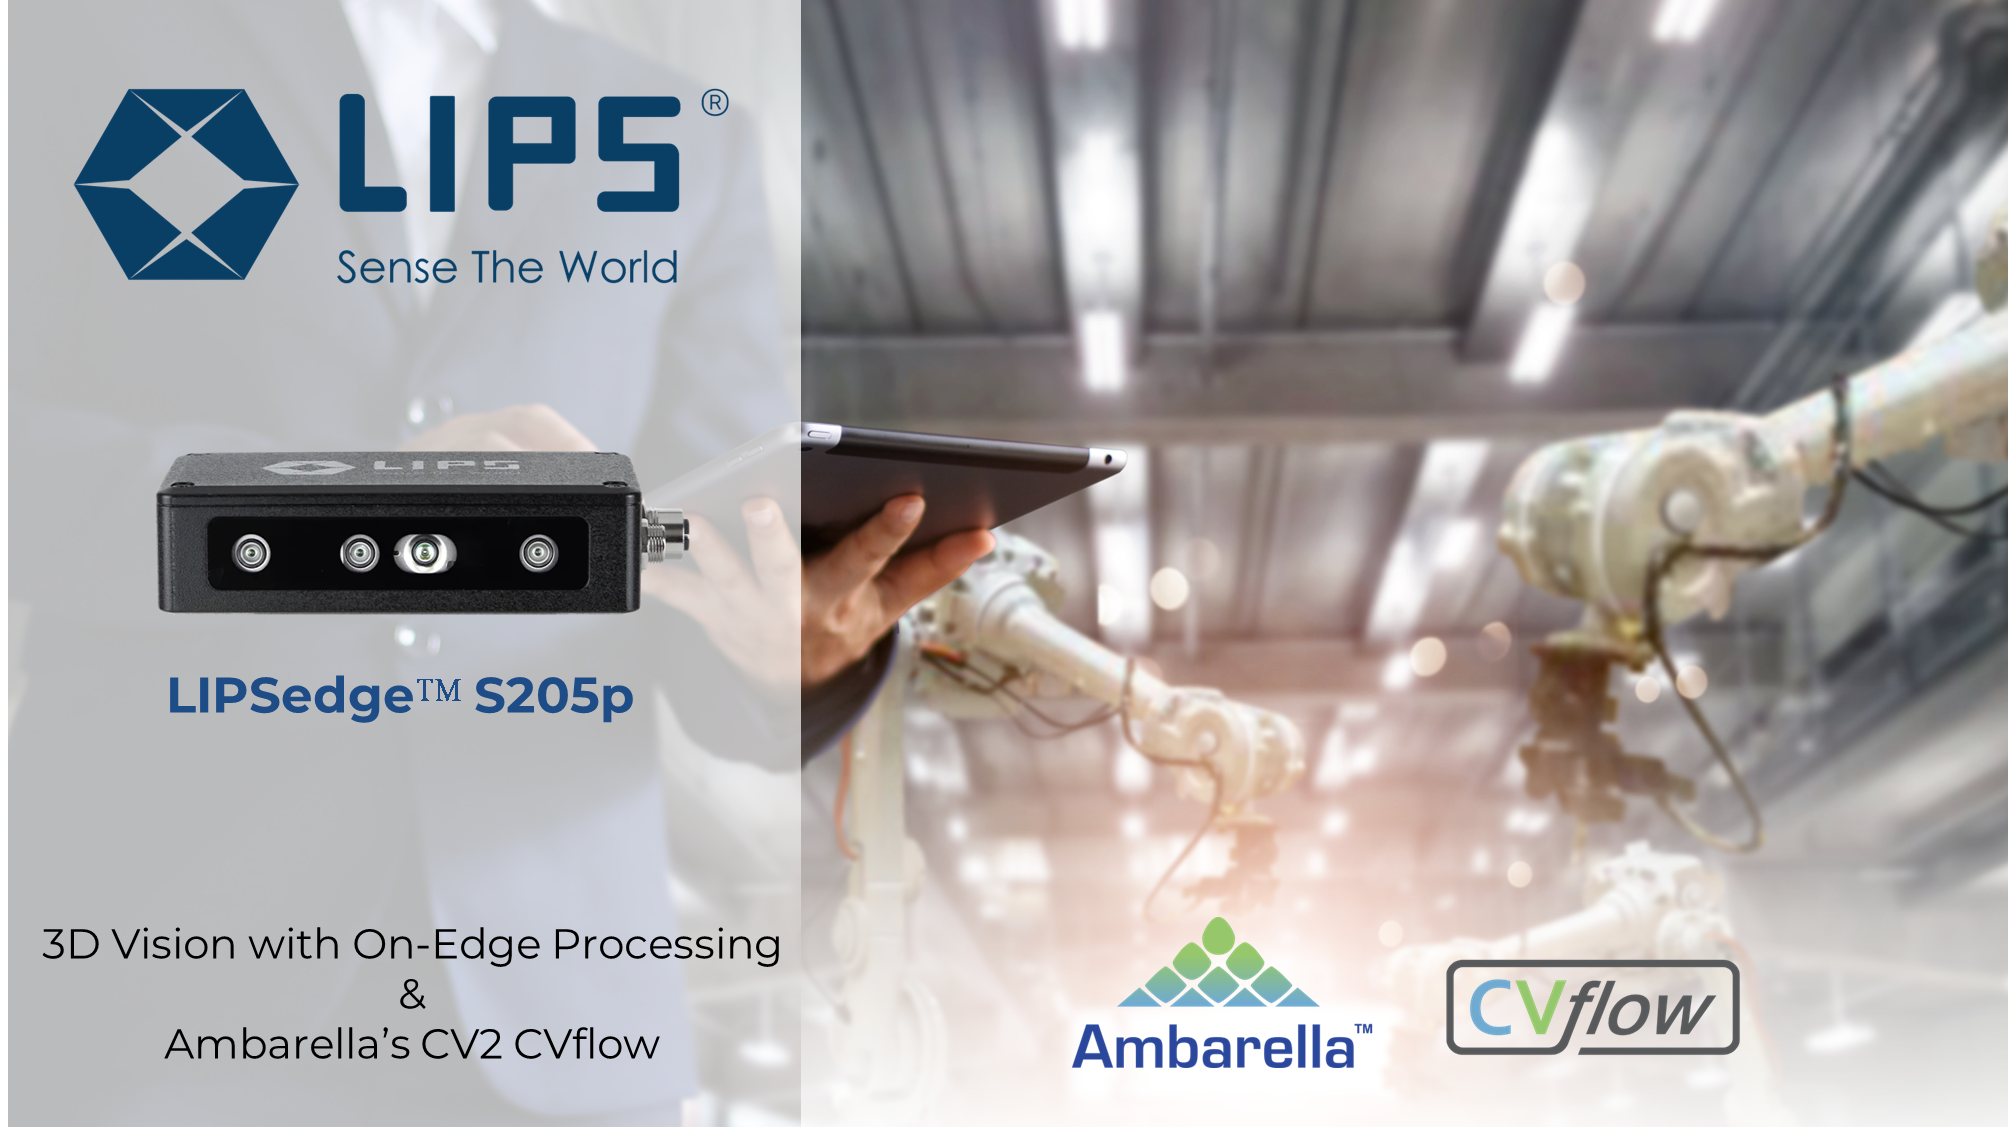 Factory Automation with On-board CV2 SoC in 3D Depth Cameras